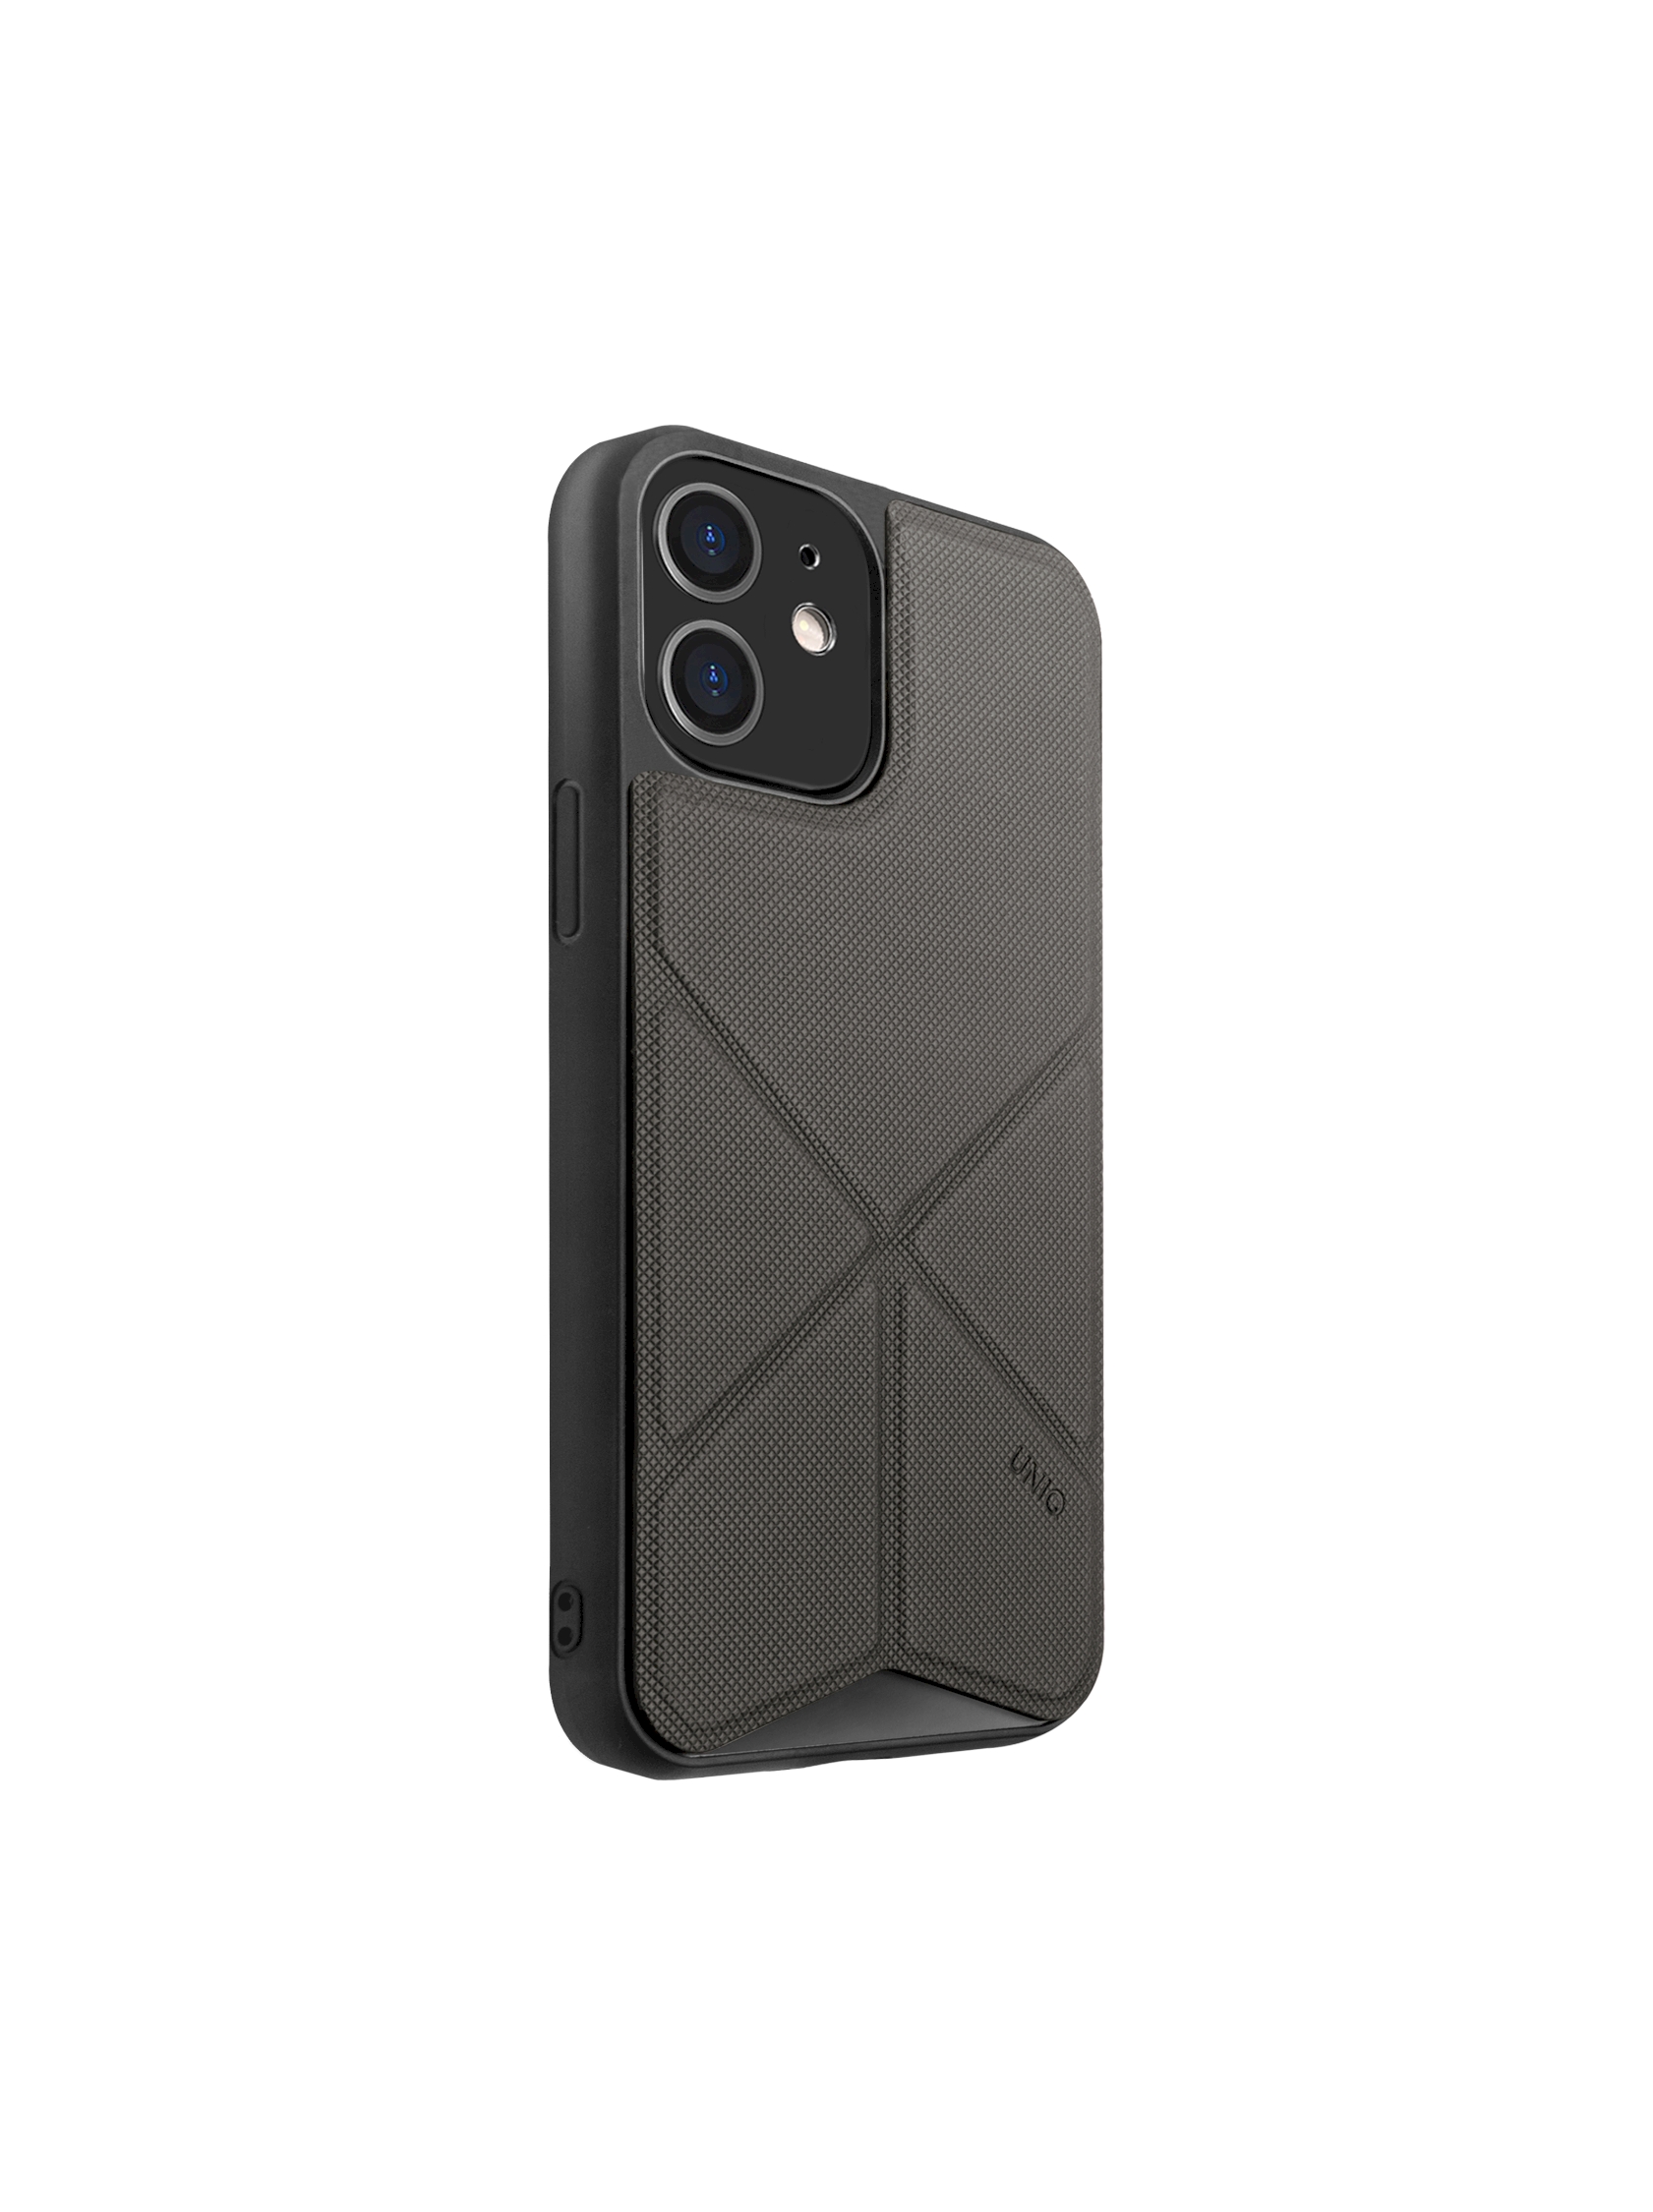 iPhone 12 Mini, case transforma, stand up charcoal, grey